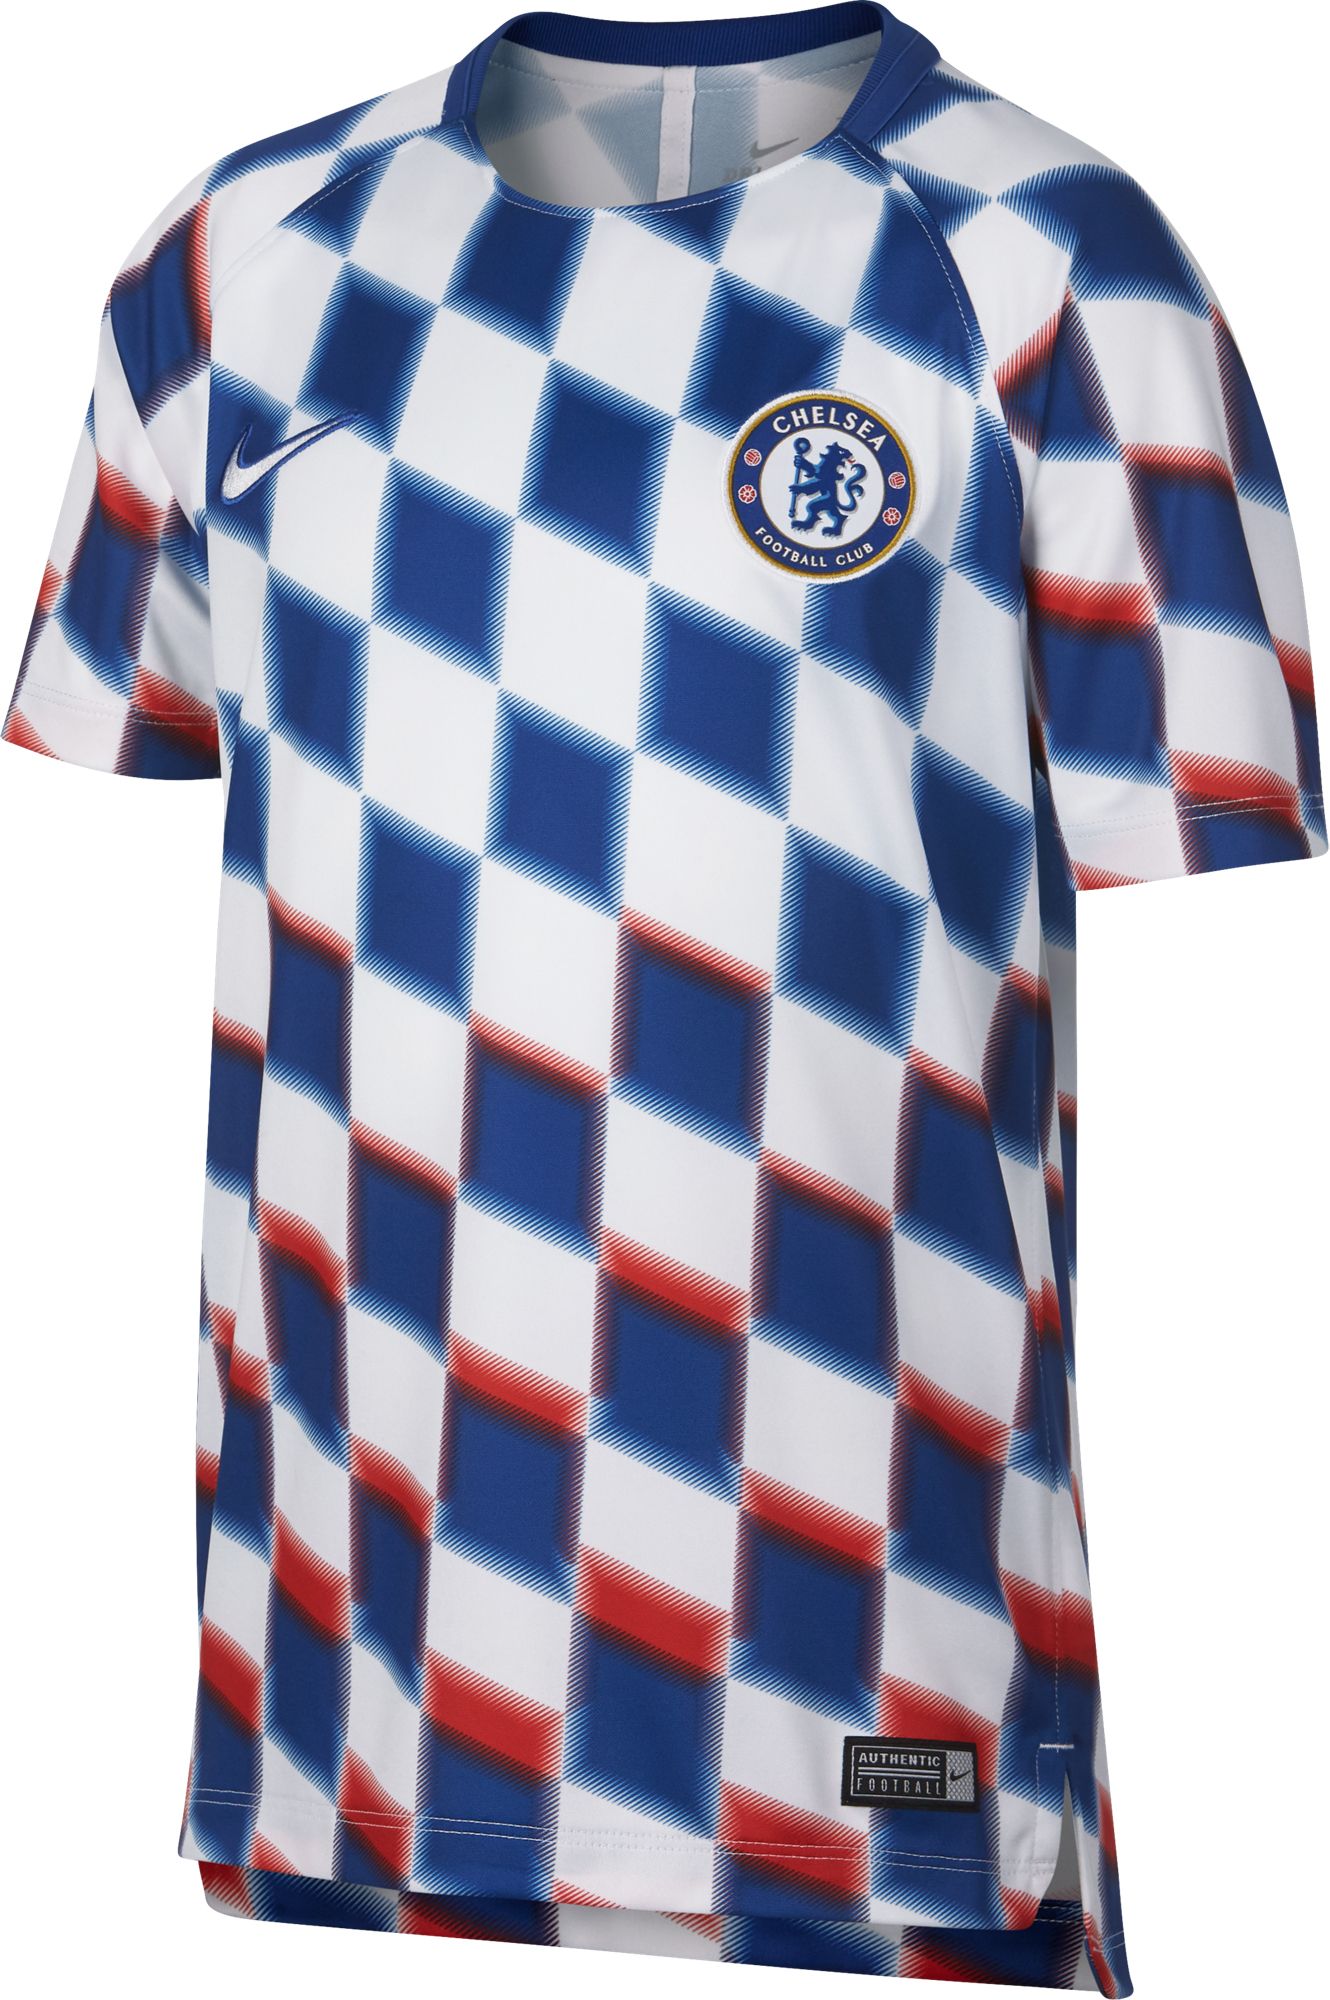 chelsea checkered jersey